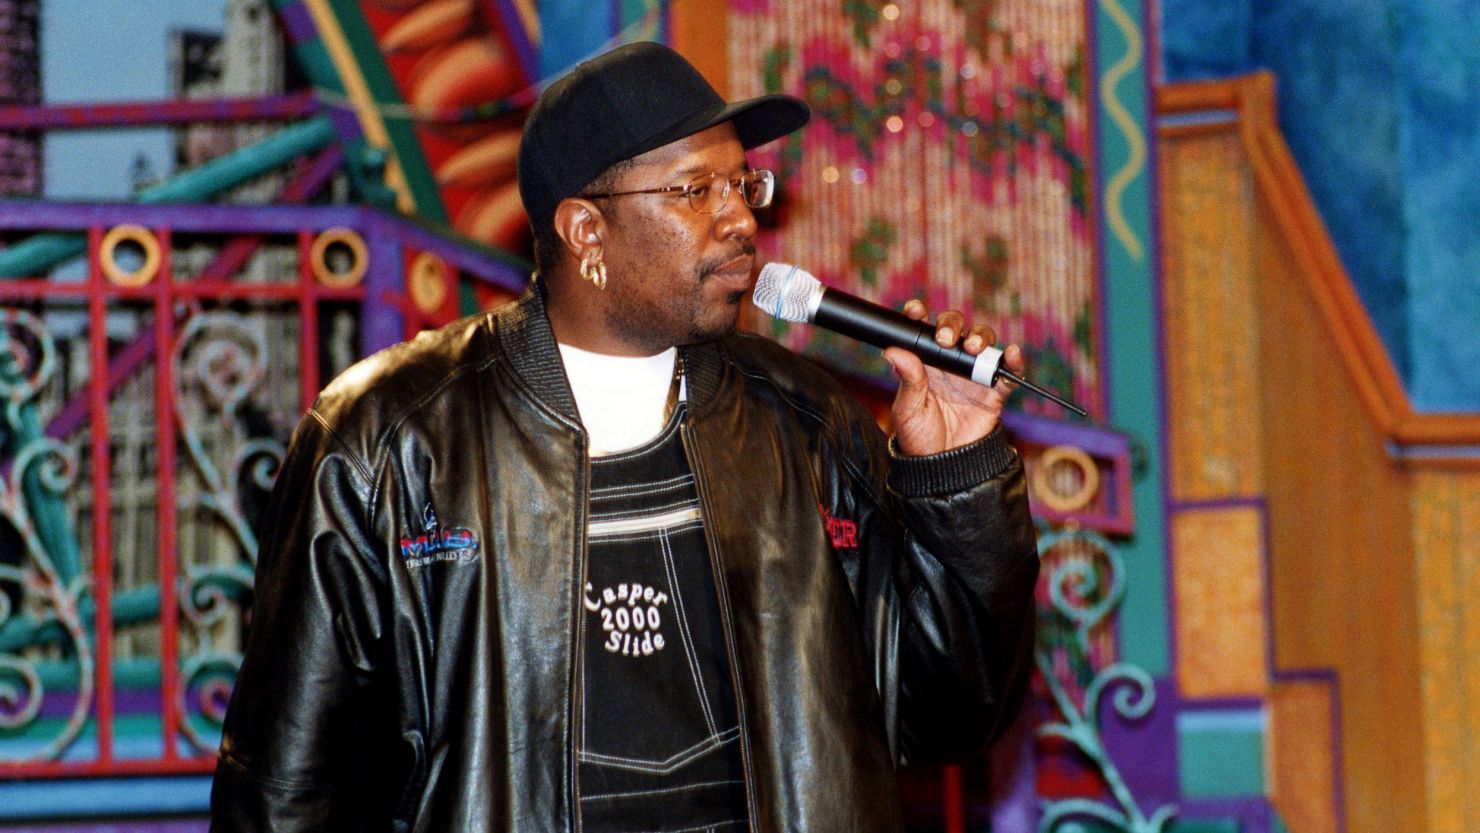 DJ Casper (Willie Perry, Jr.) seen in rehearsals for his performance on 'The Jenny Jones Show' in Chicago, Illinois in September 2000.